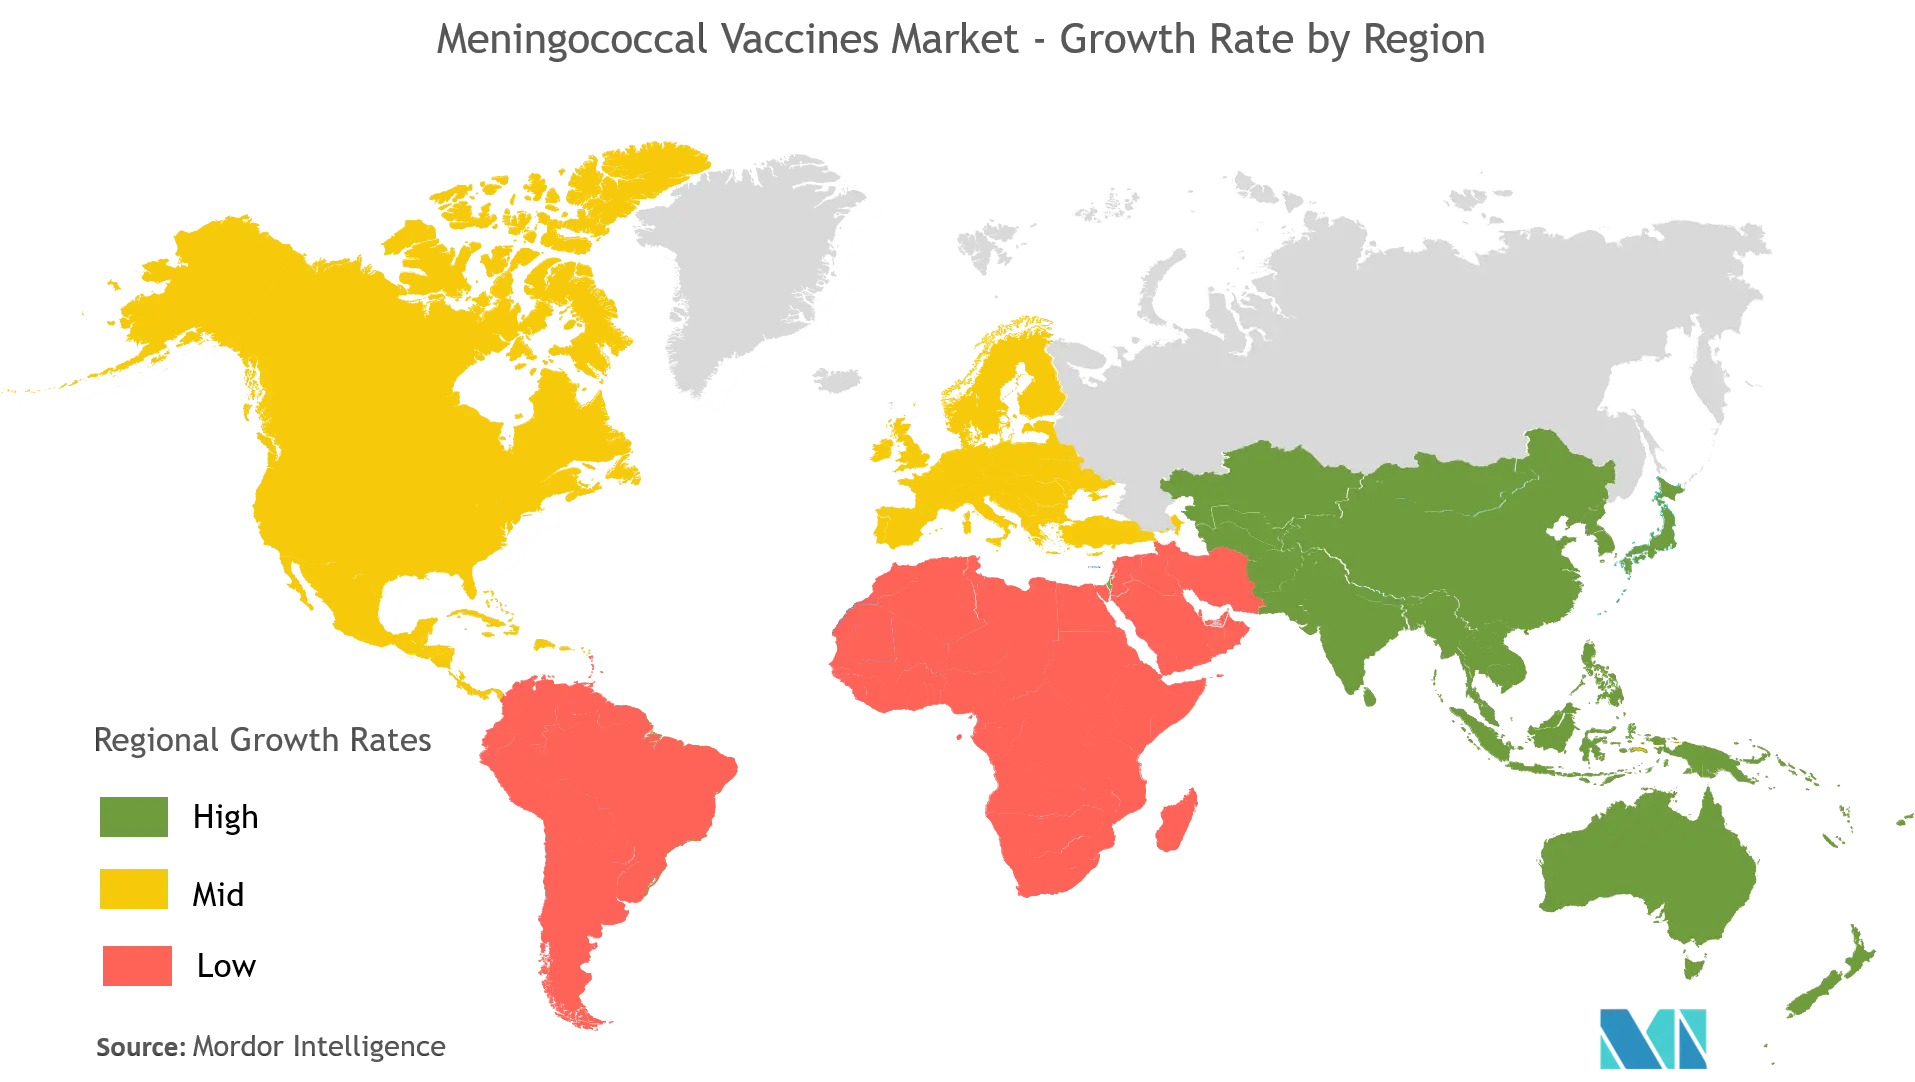 Meningococcal Vaccines Market Growth Rate